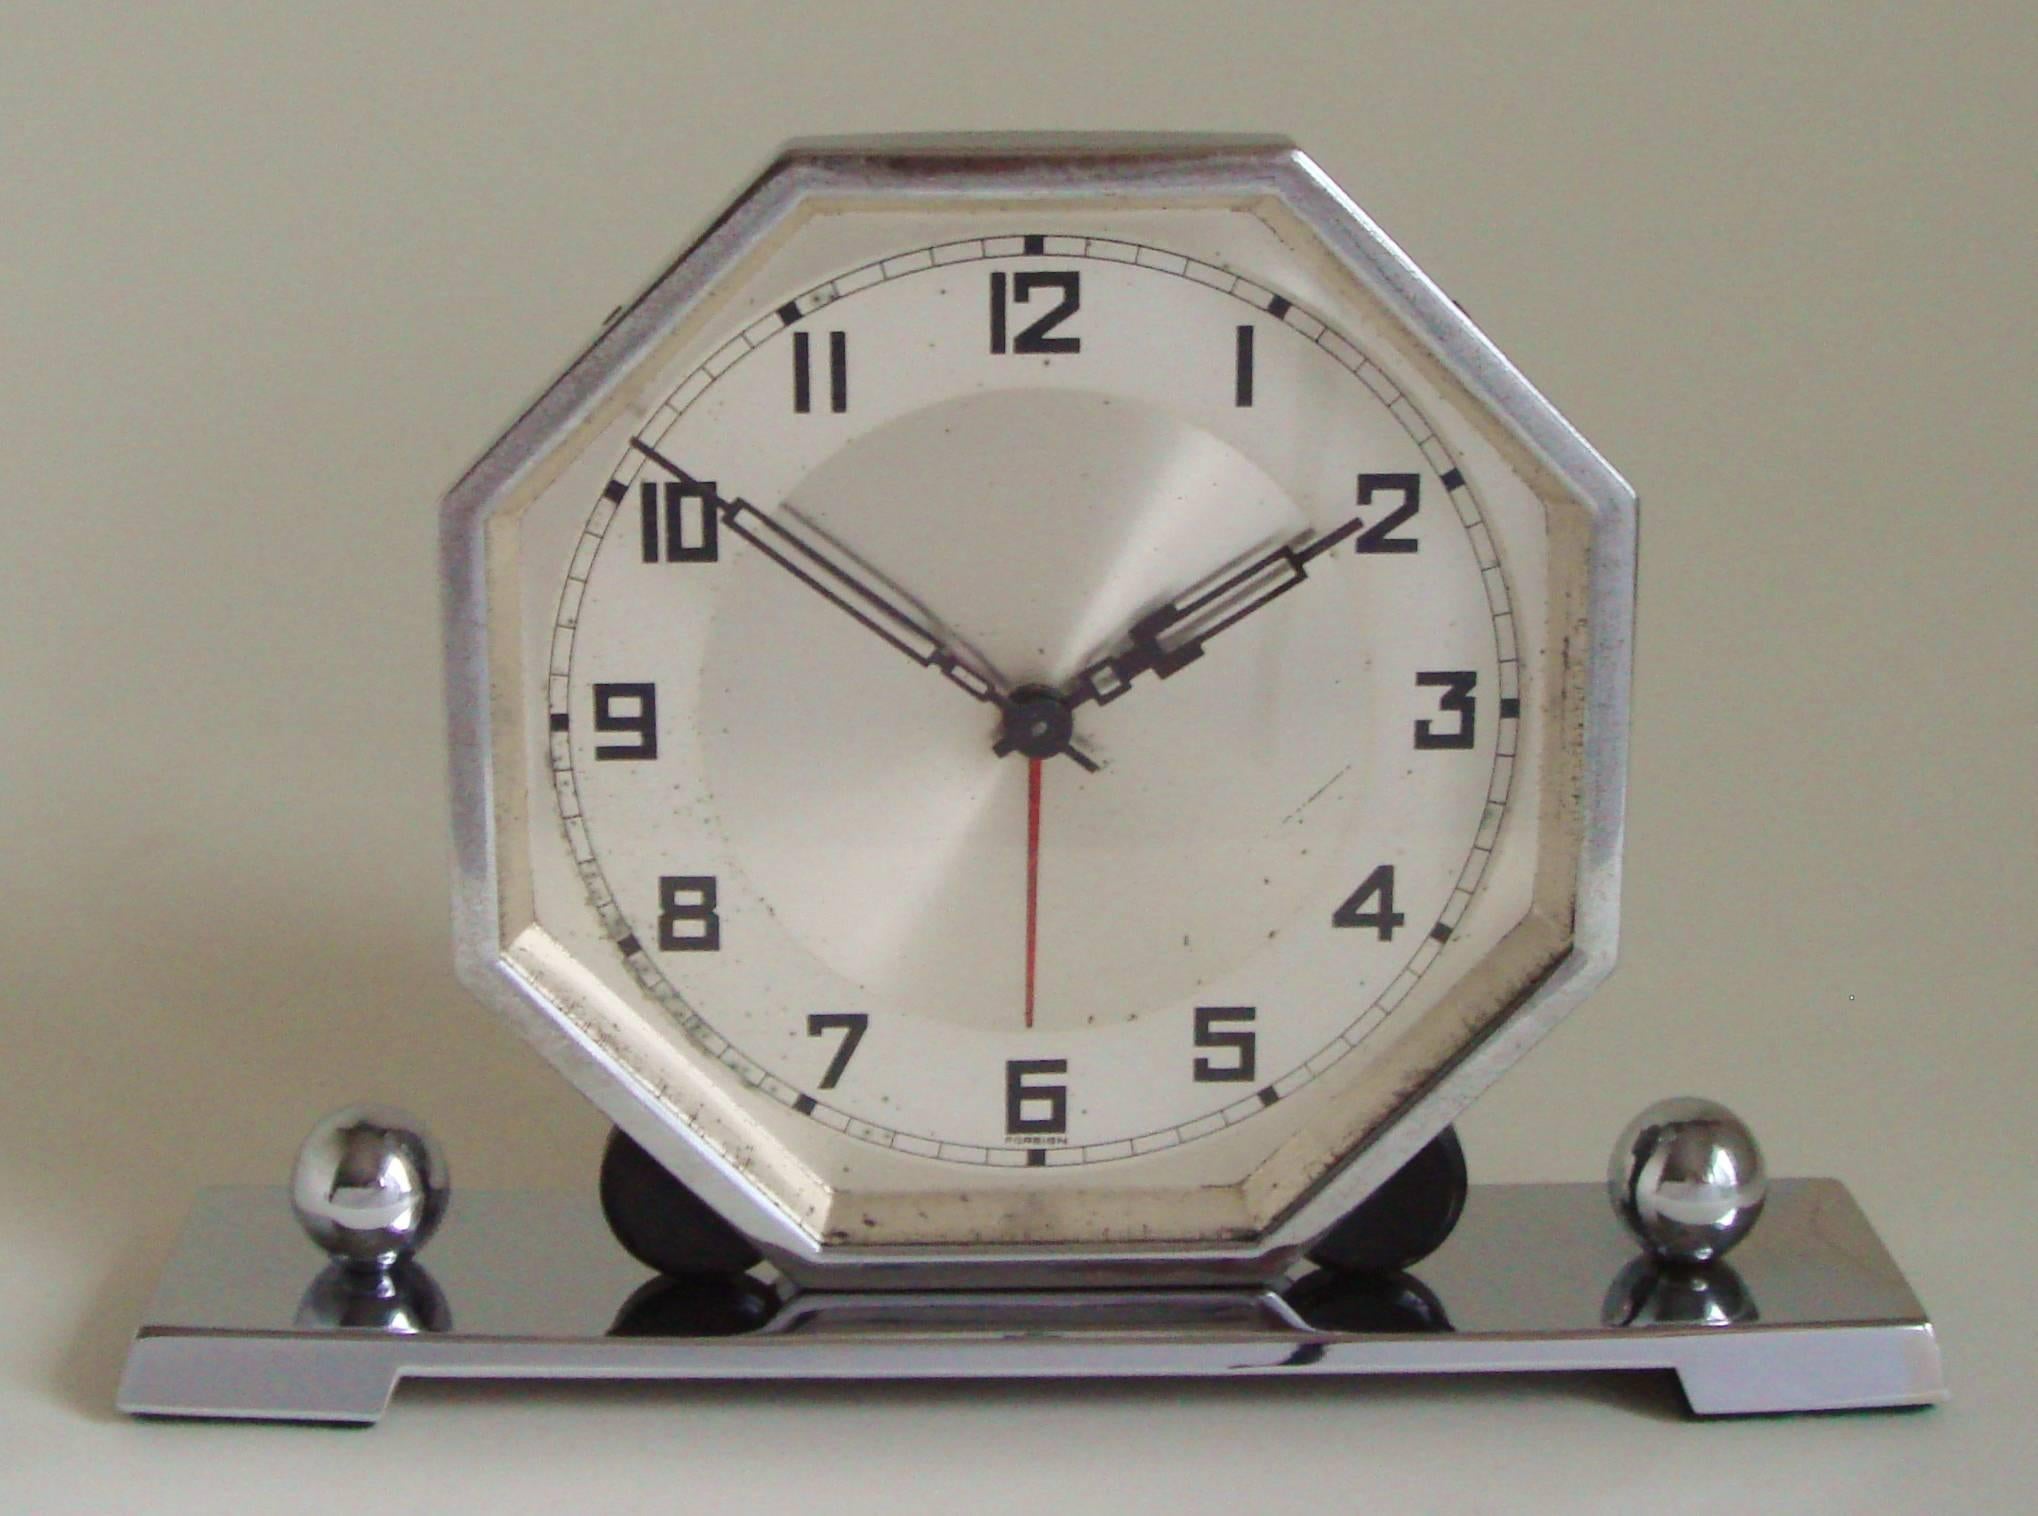 The hexagonal chrome body and bezel of this German Art Deco alarm clock stands on an oblong chrome footed plinth and is held in place by two demi-lunes of black Bakelite and bookended by two chrome spheres. The face does have some age spots but the